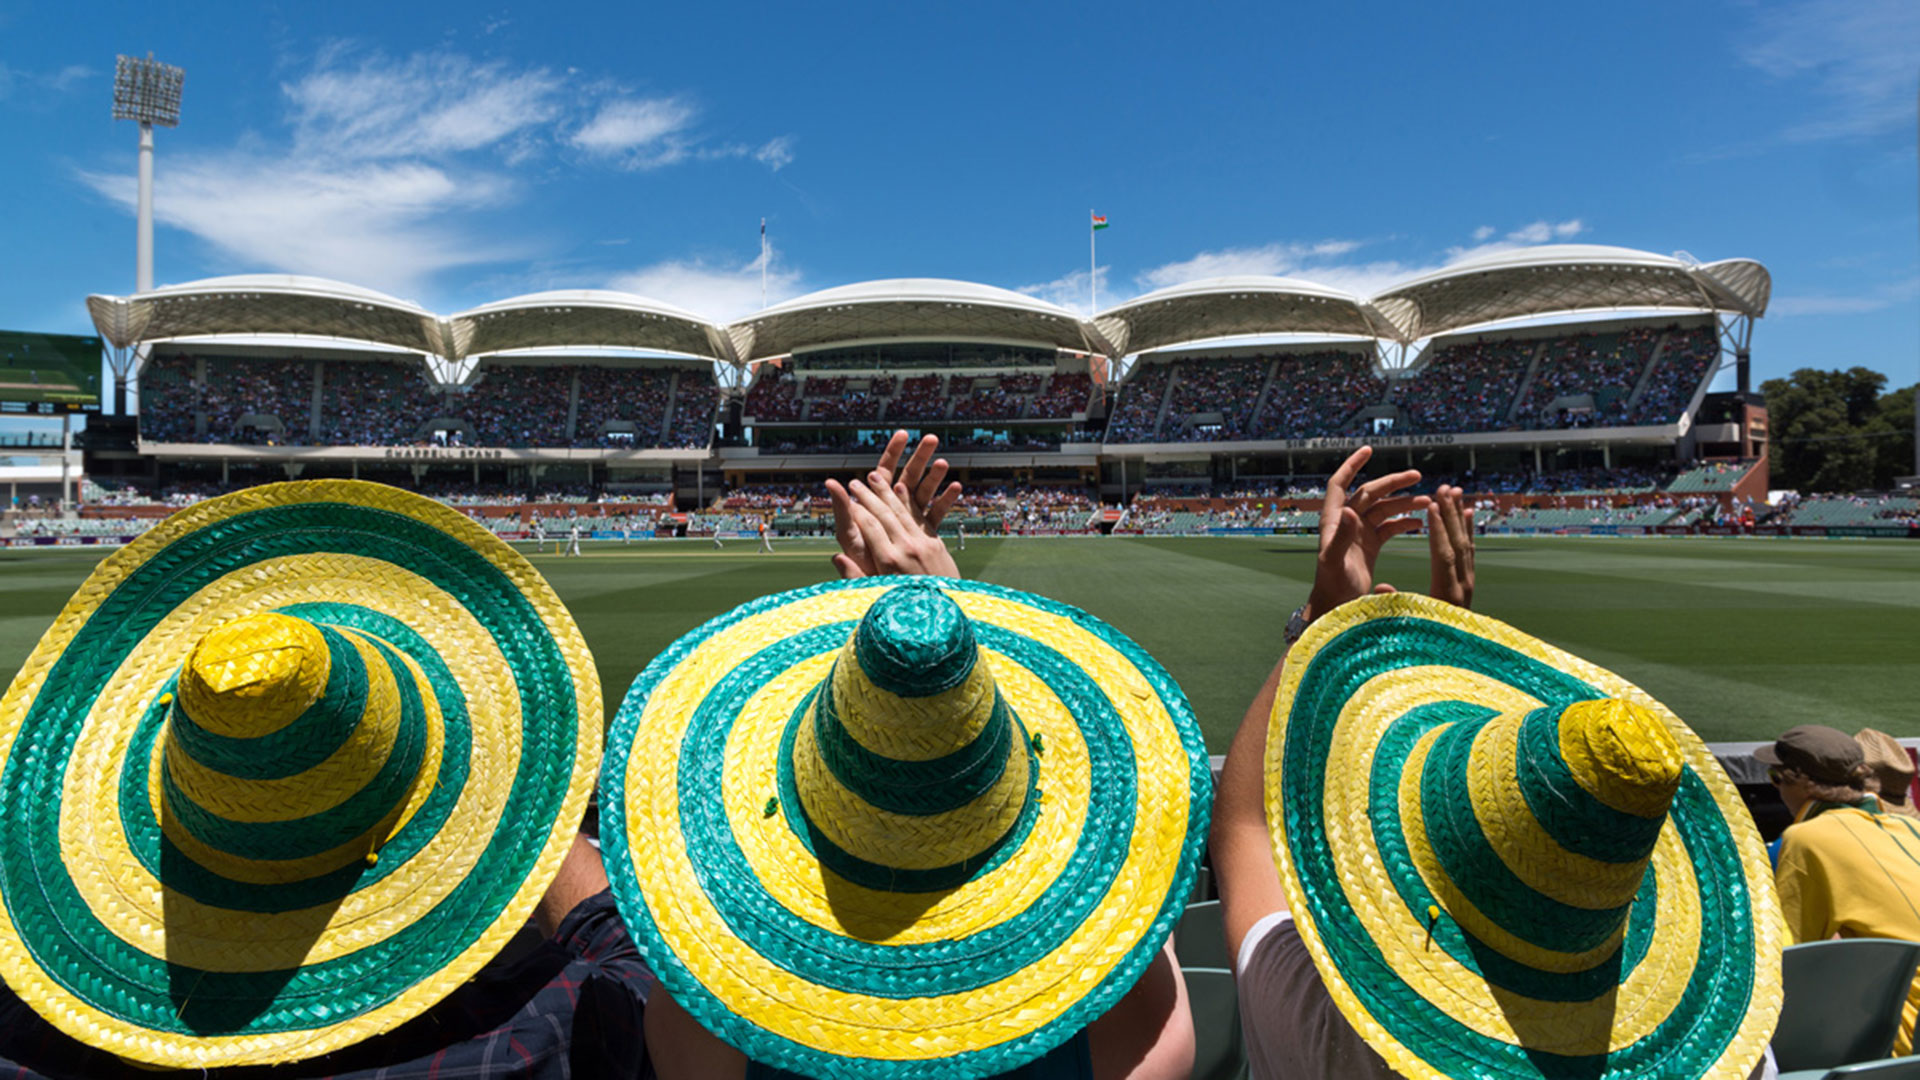 Fans watching the ODI at Adelaide Oval